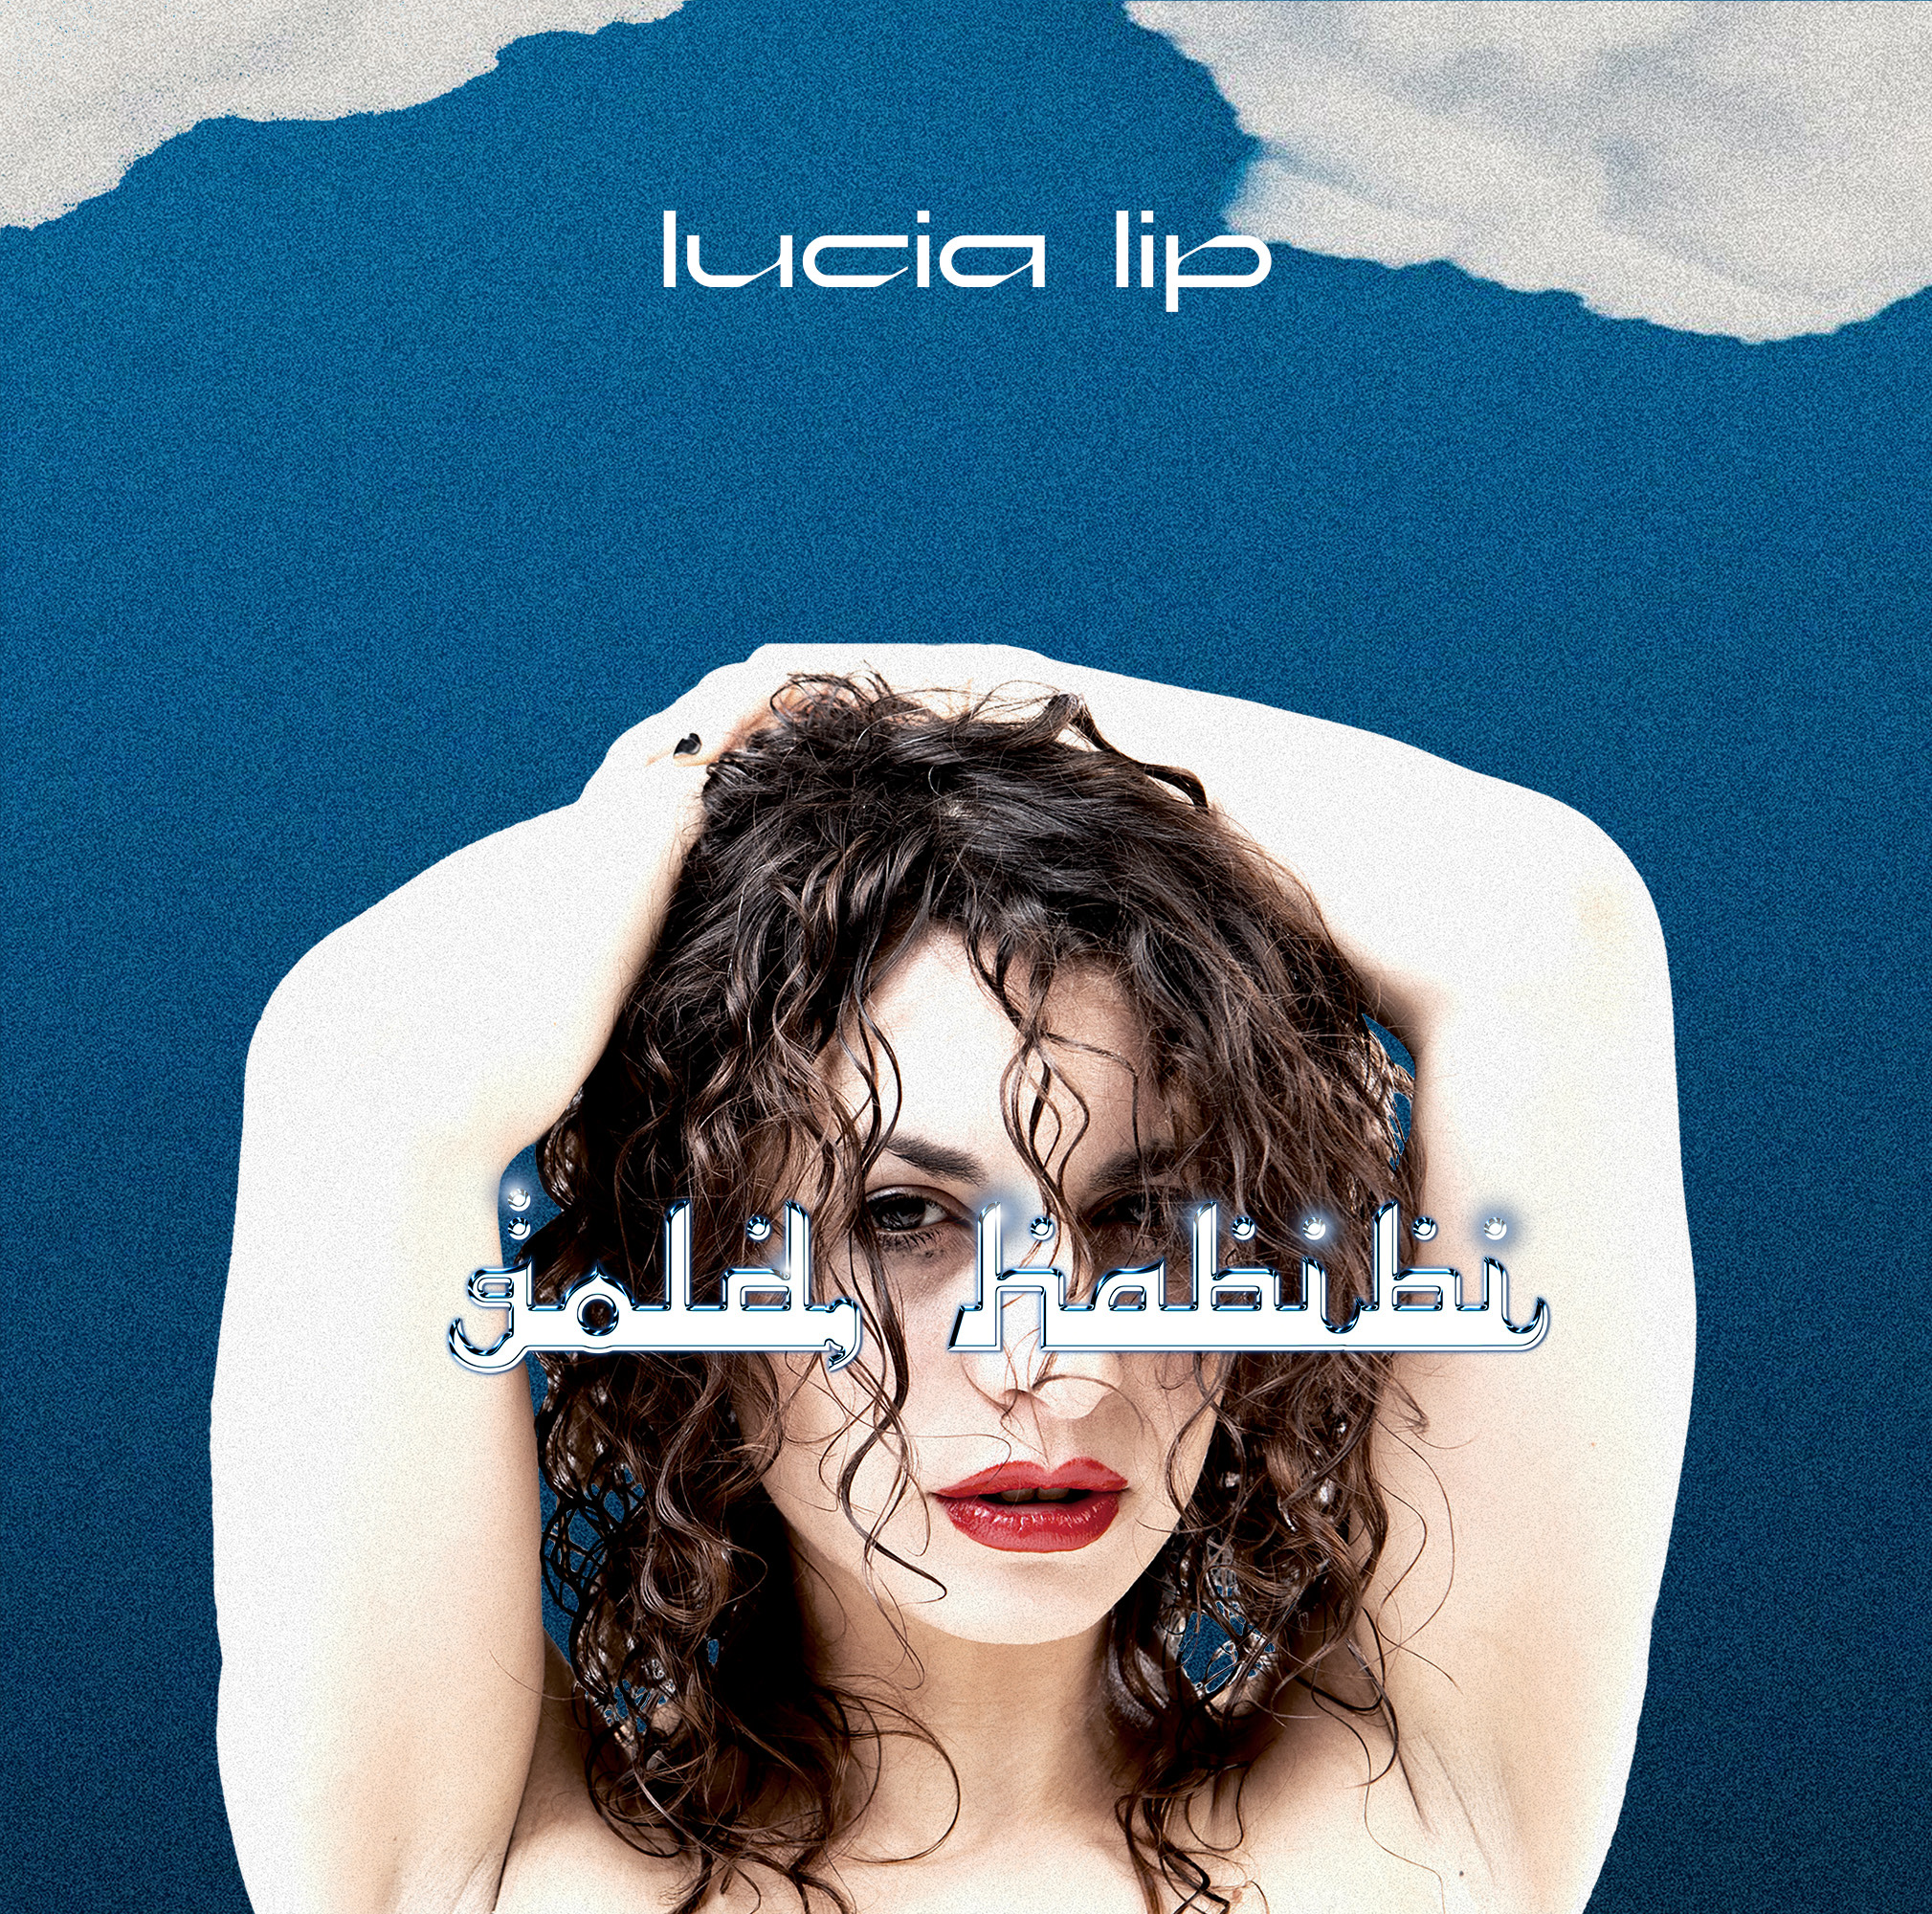 Image for LUCIA LIP – Record release party